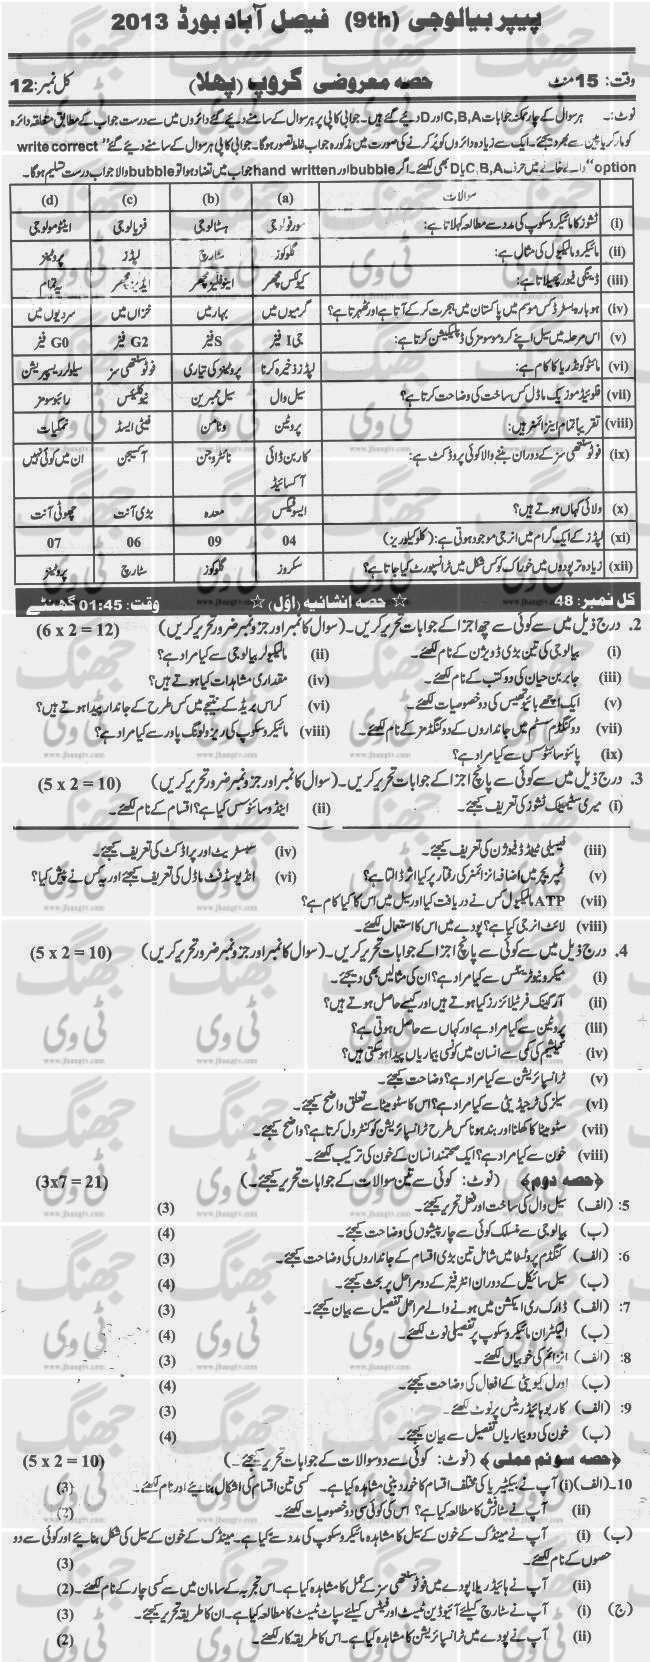 Past-Papers-2013-Faisalabad-Board-9th-Class-Biology-Group-1 copy